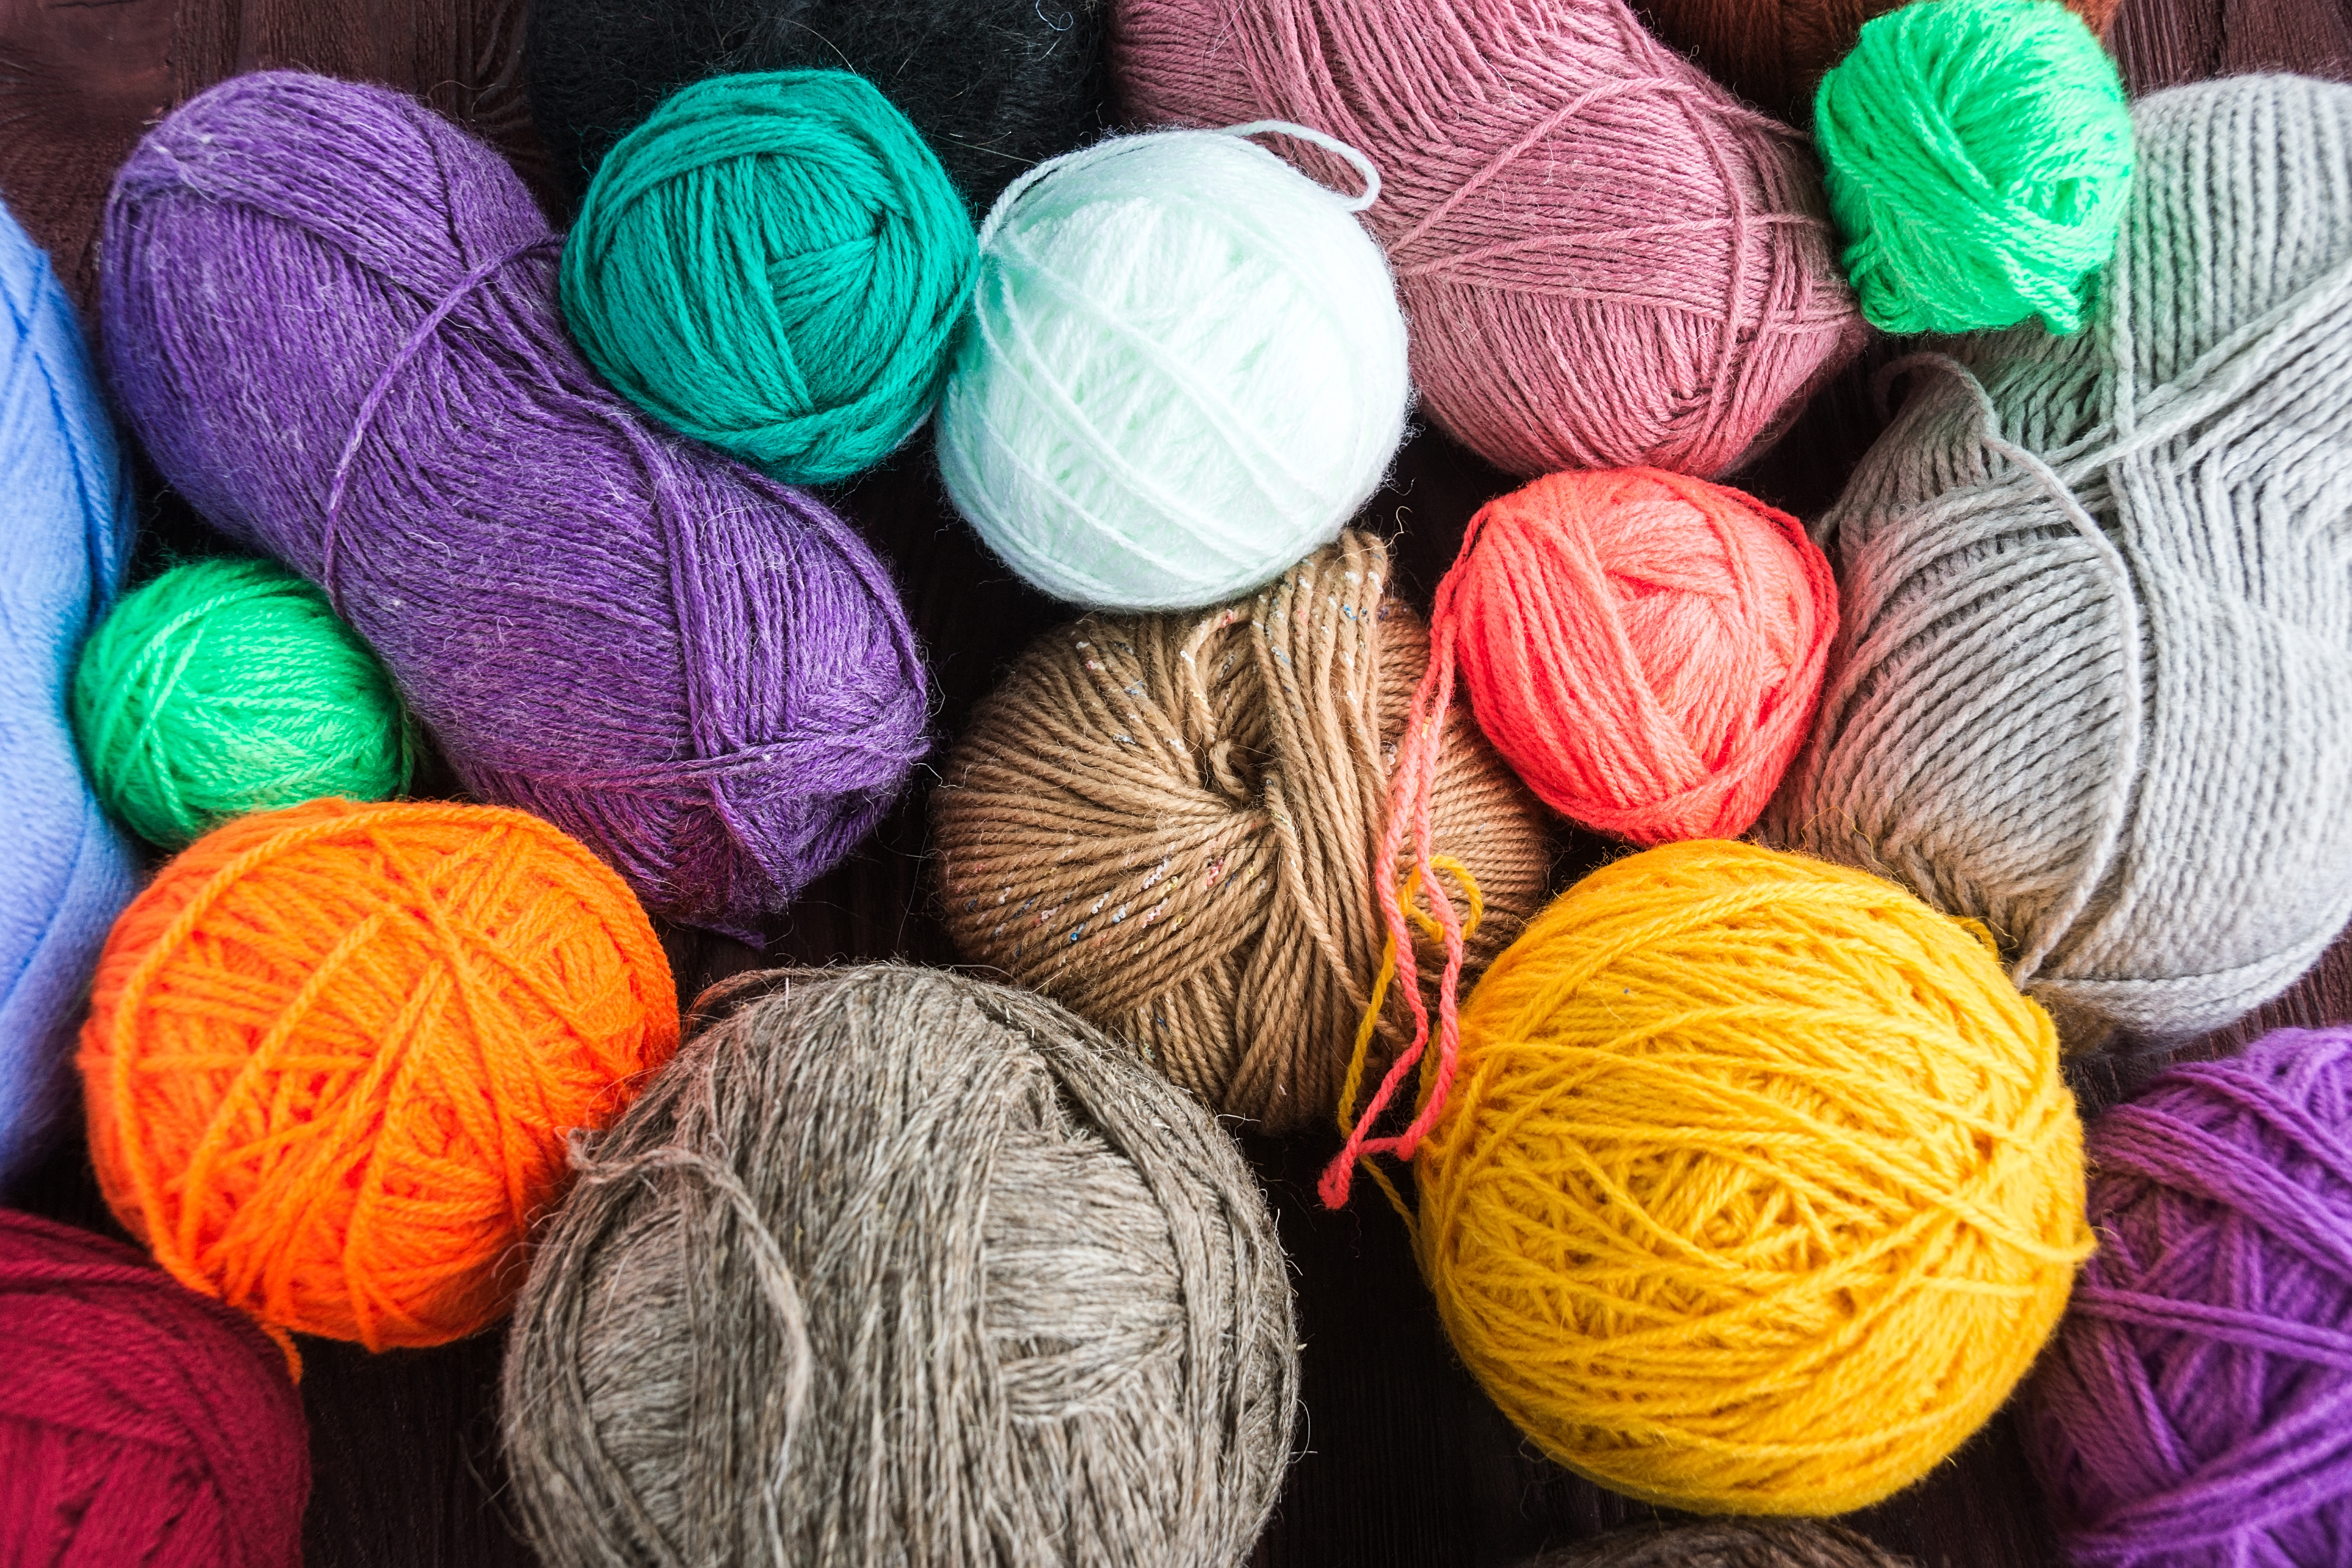 An Online Knitting Community With 8M Users Has Banned All Pro-Trump Posts